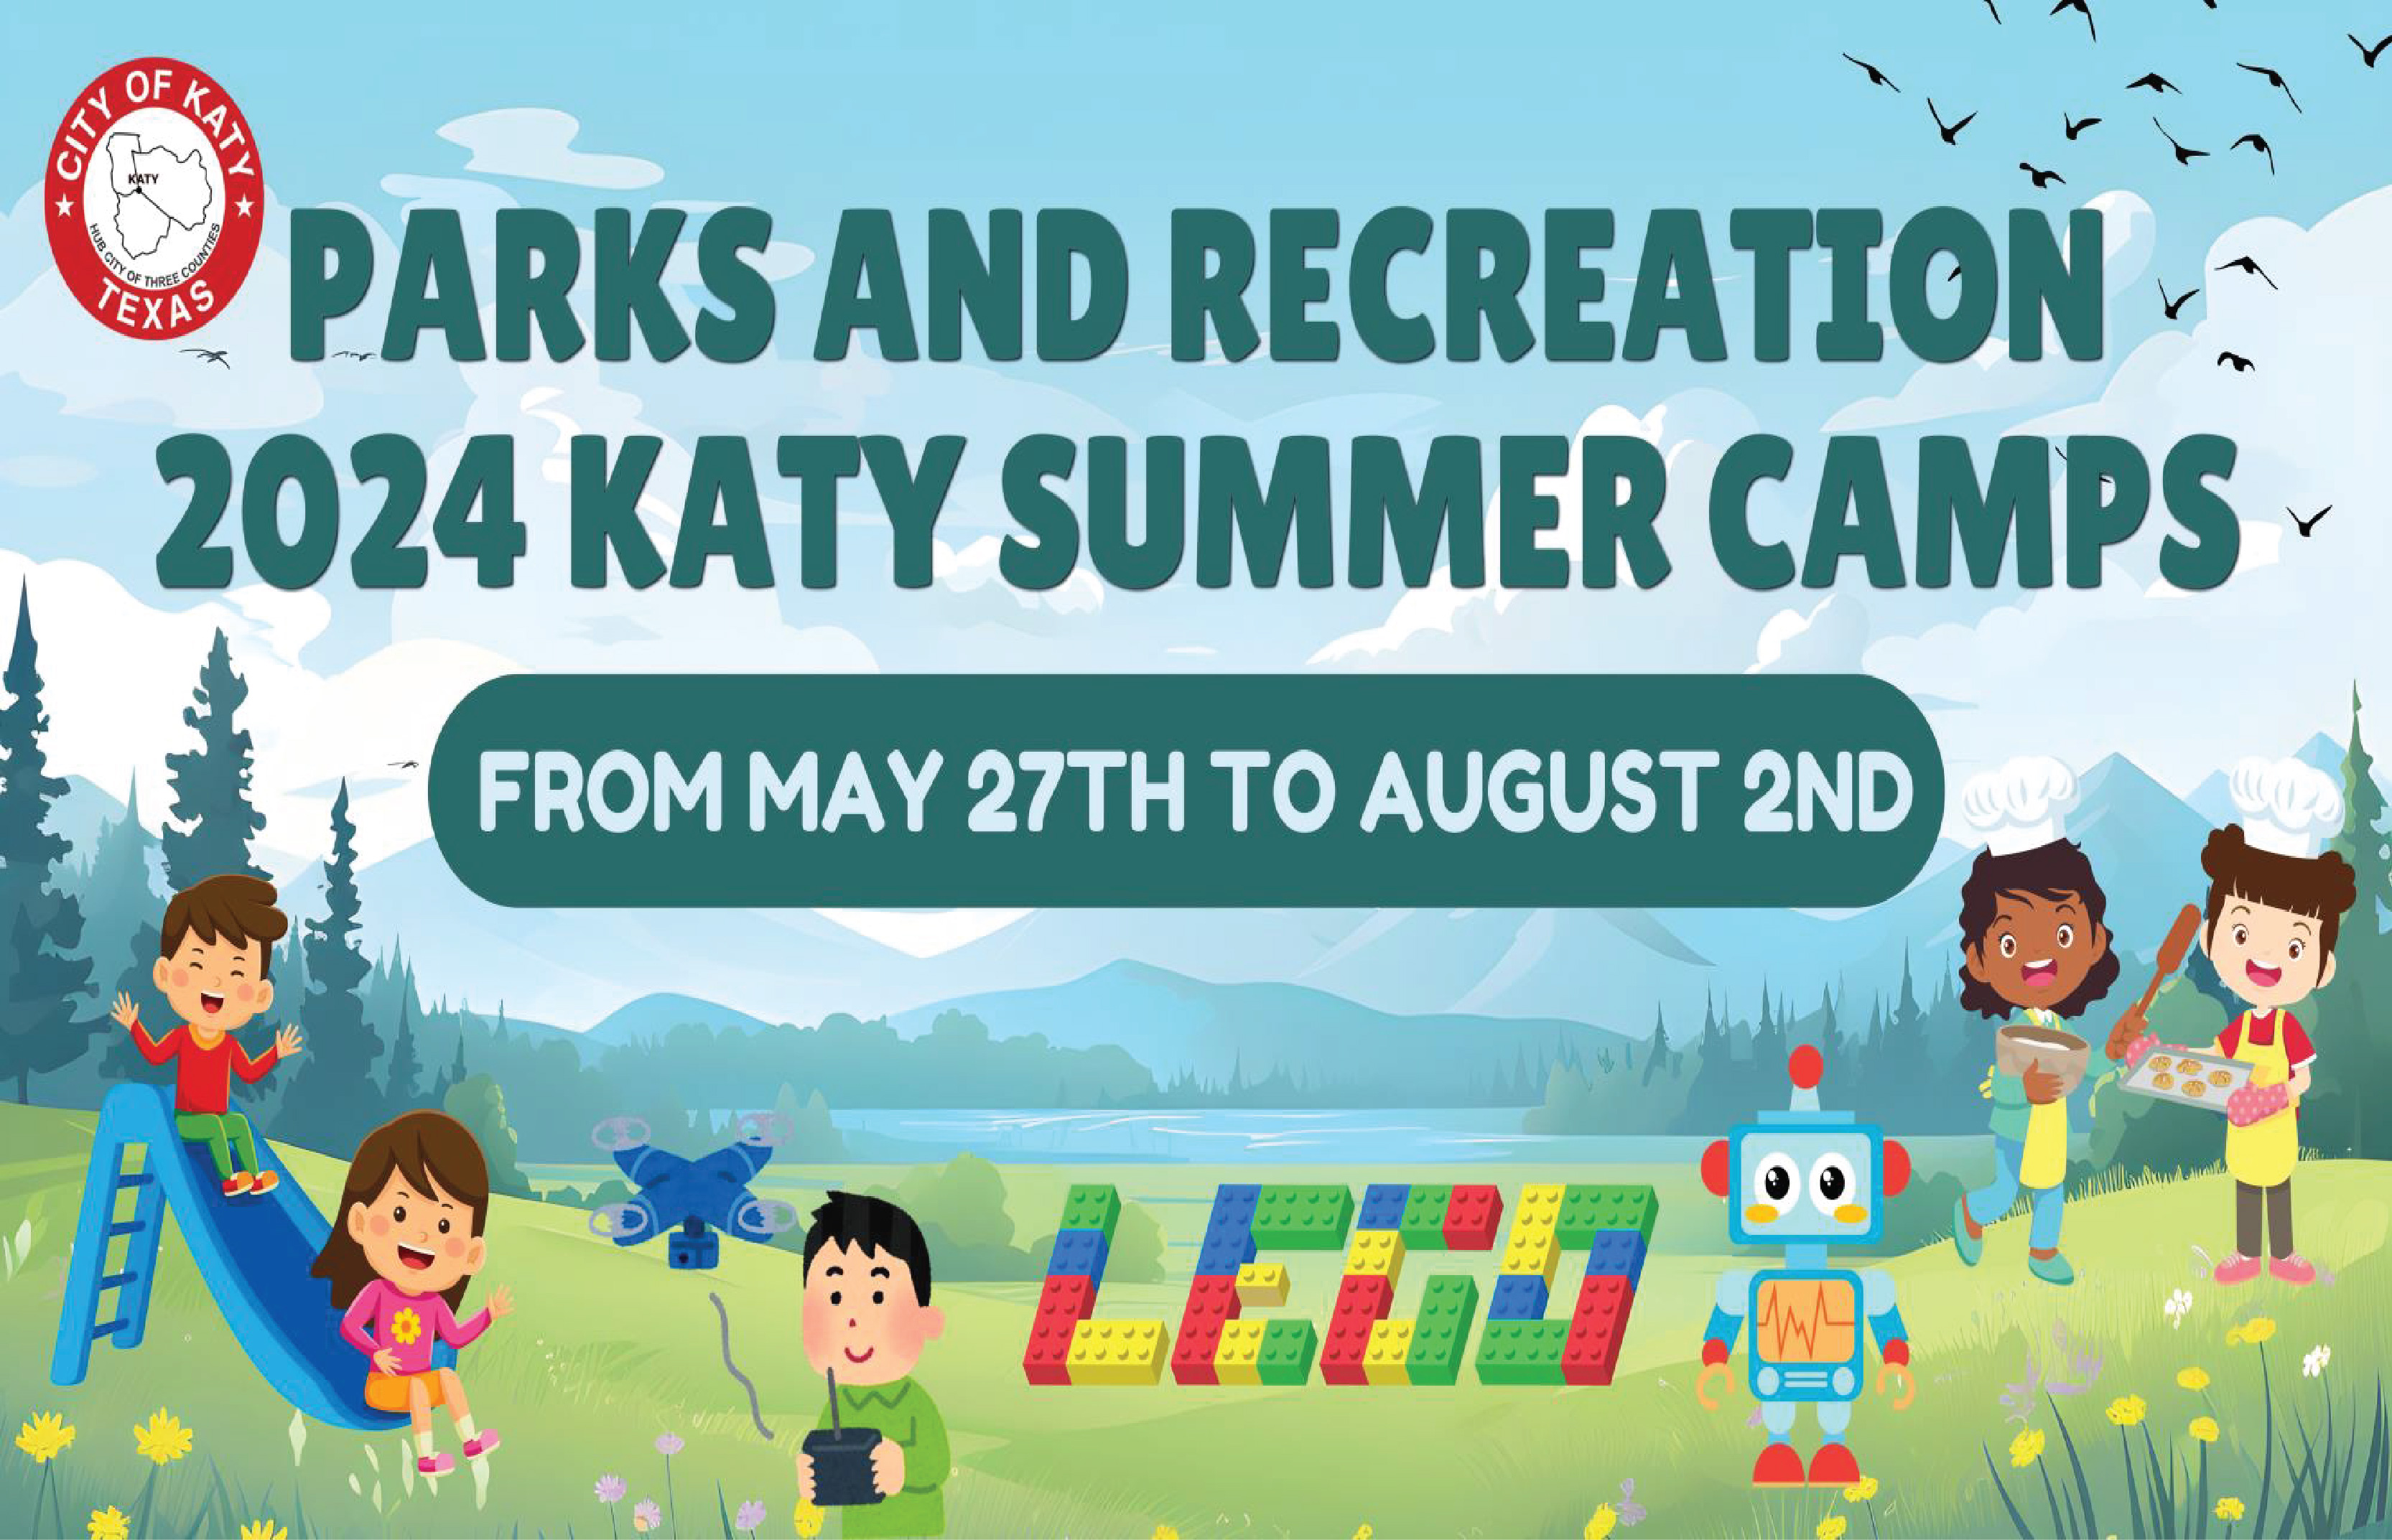 City of Katy Announces 2024 Summer Camps